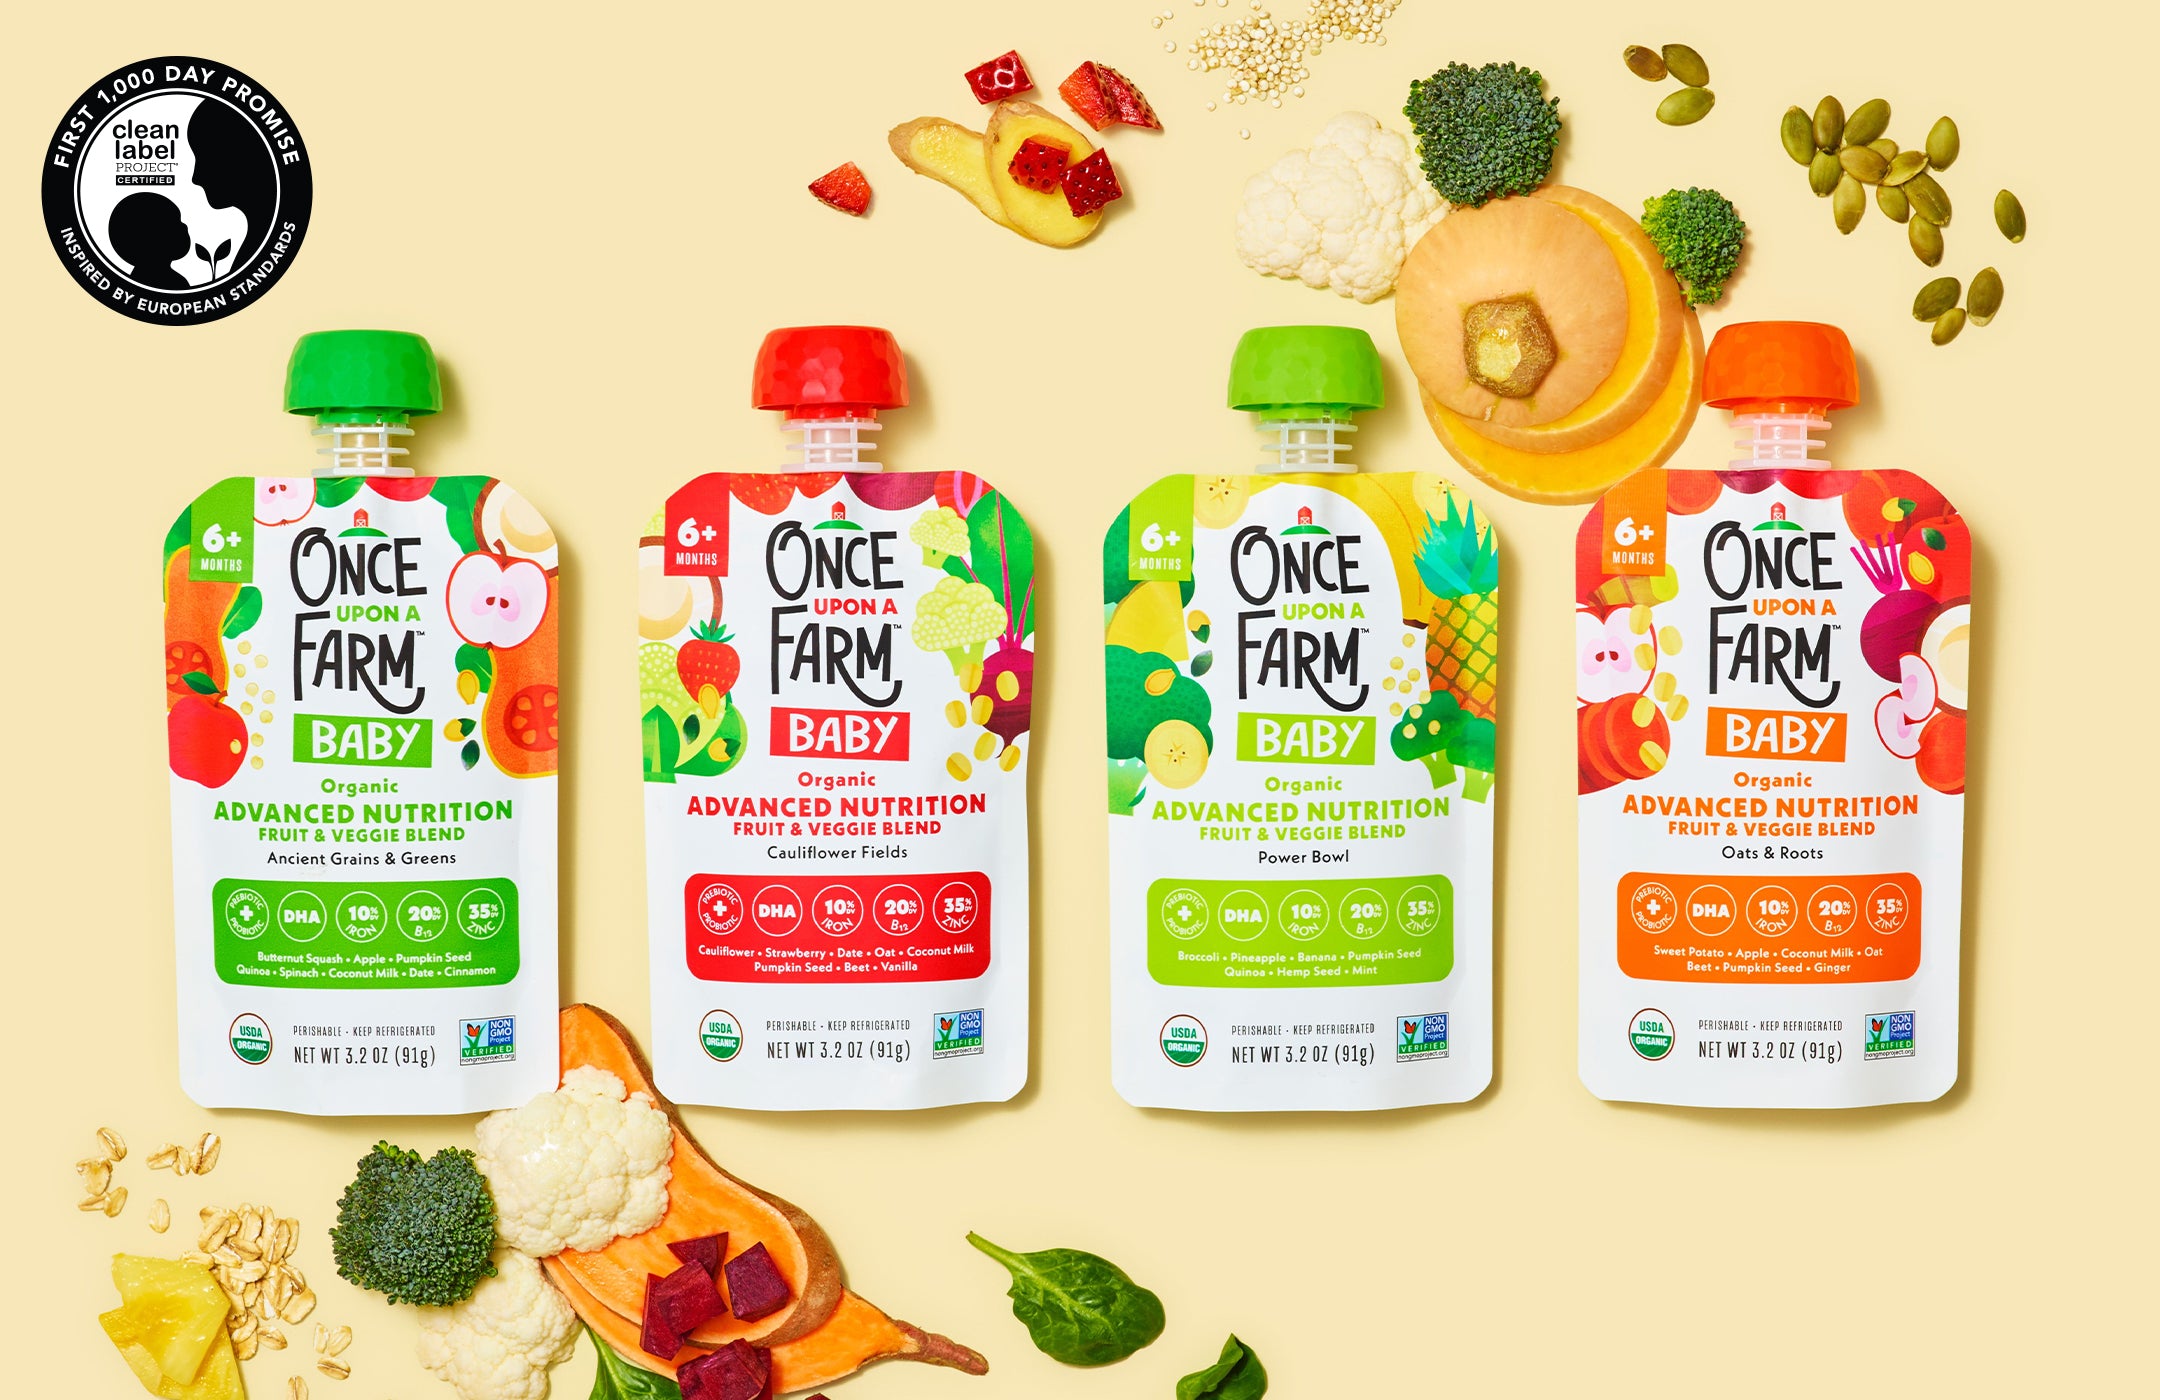 Meet the First Baby Food to be First 1,000 Day Promise Certified